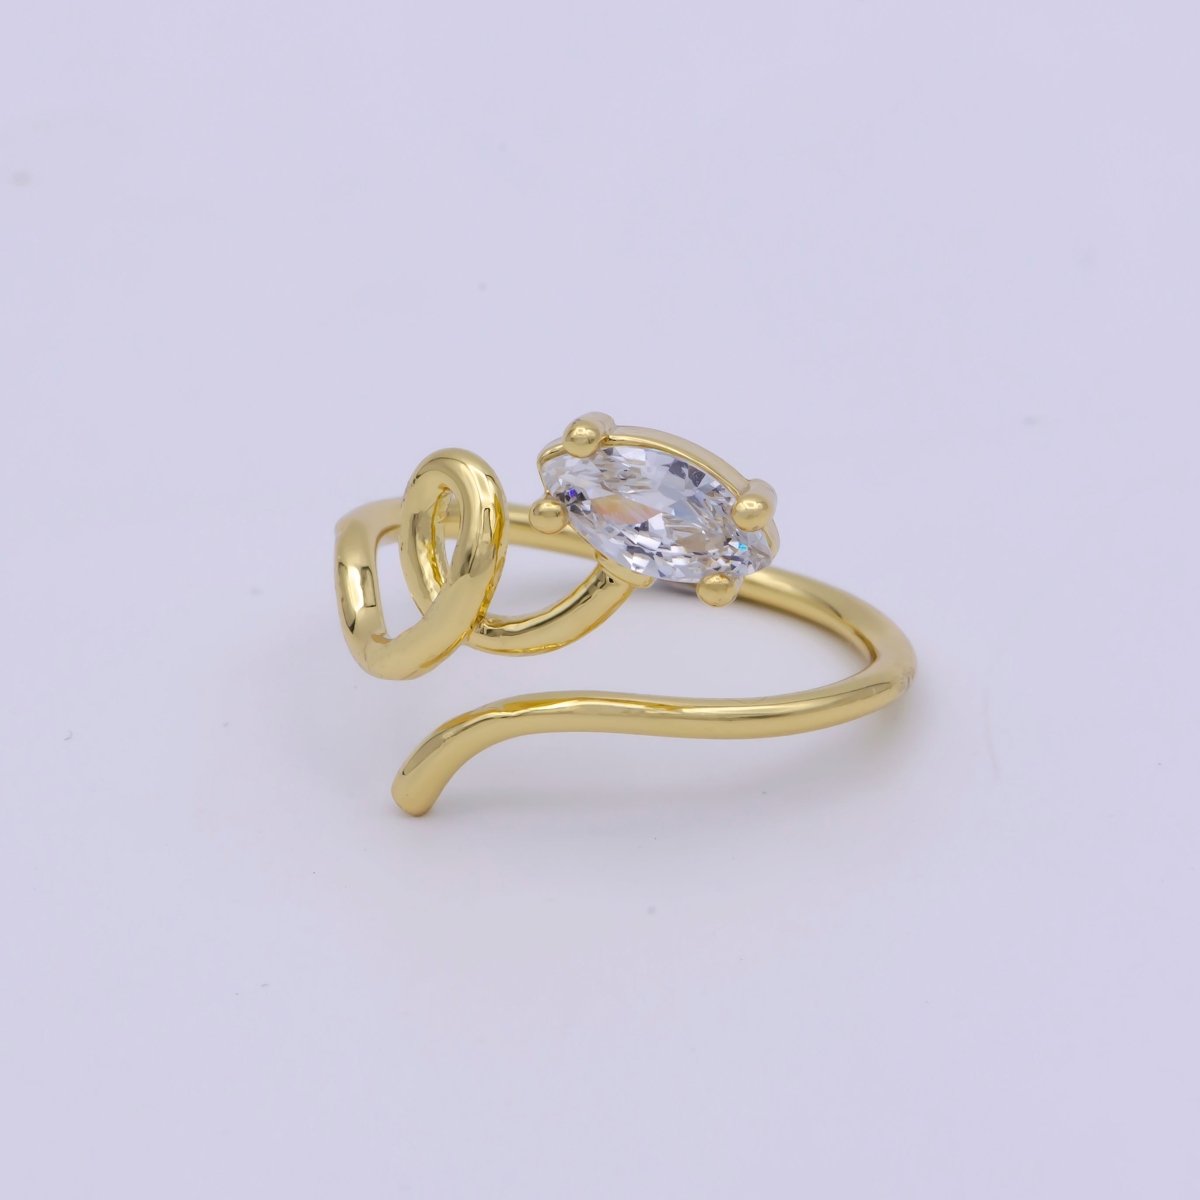 Vine Snake Shape Jewelry Rings Slim Gold Filled jewelry Party ring Gift idea U-149 - DLUXCA